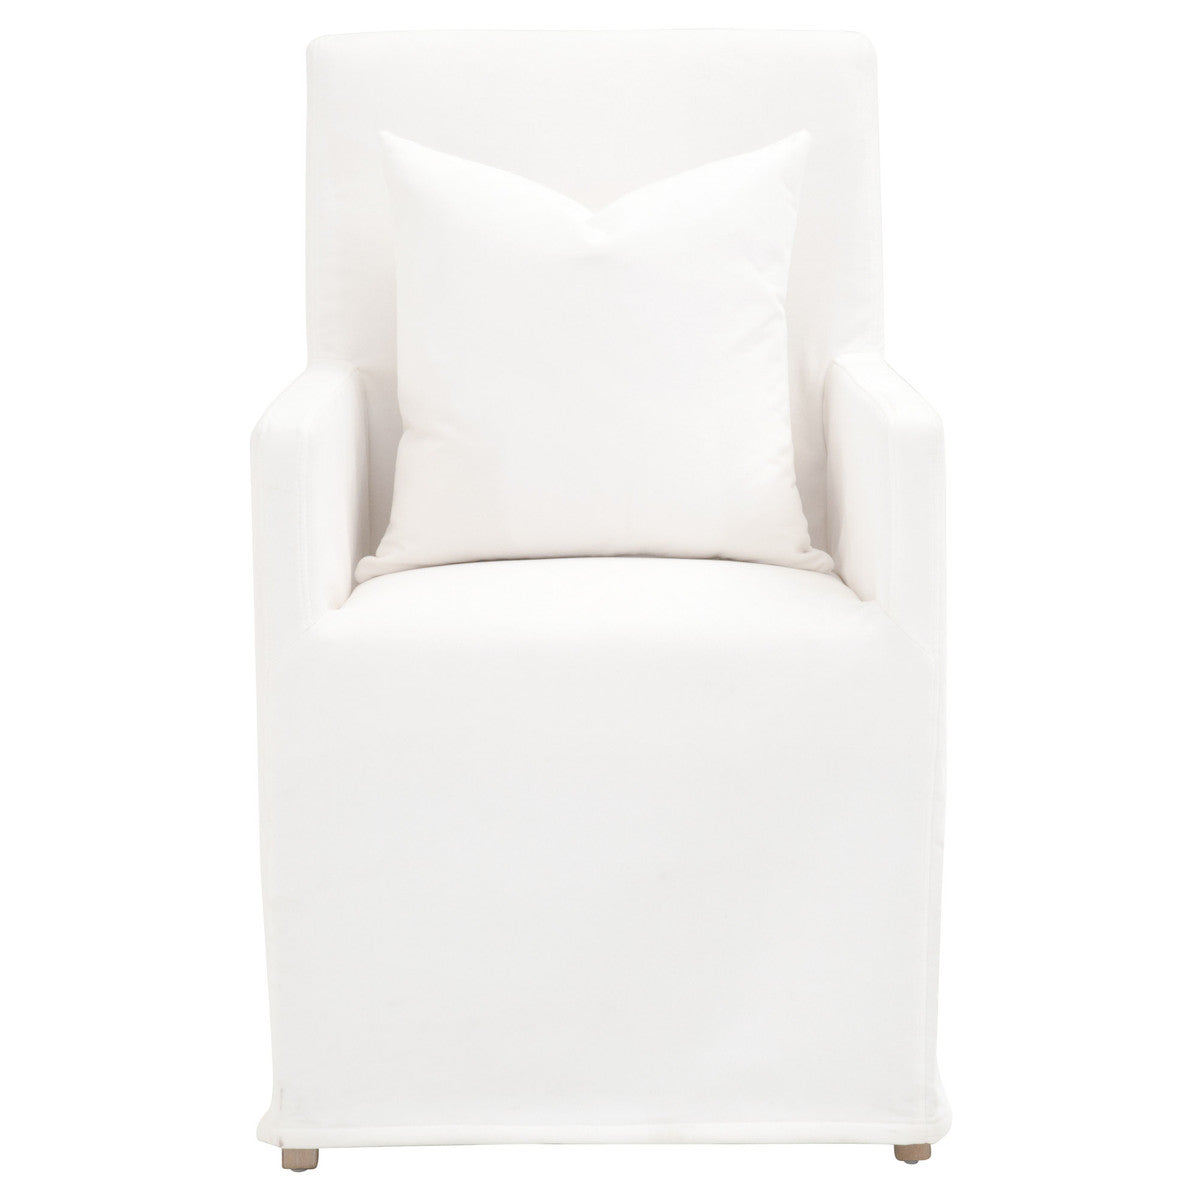 Palmetto Slipcover Dining Chair